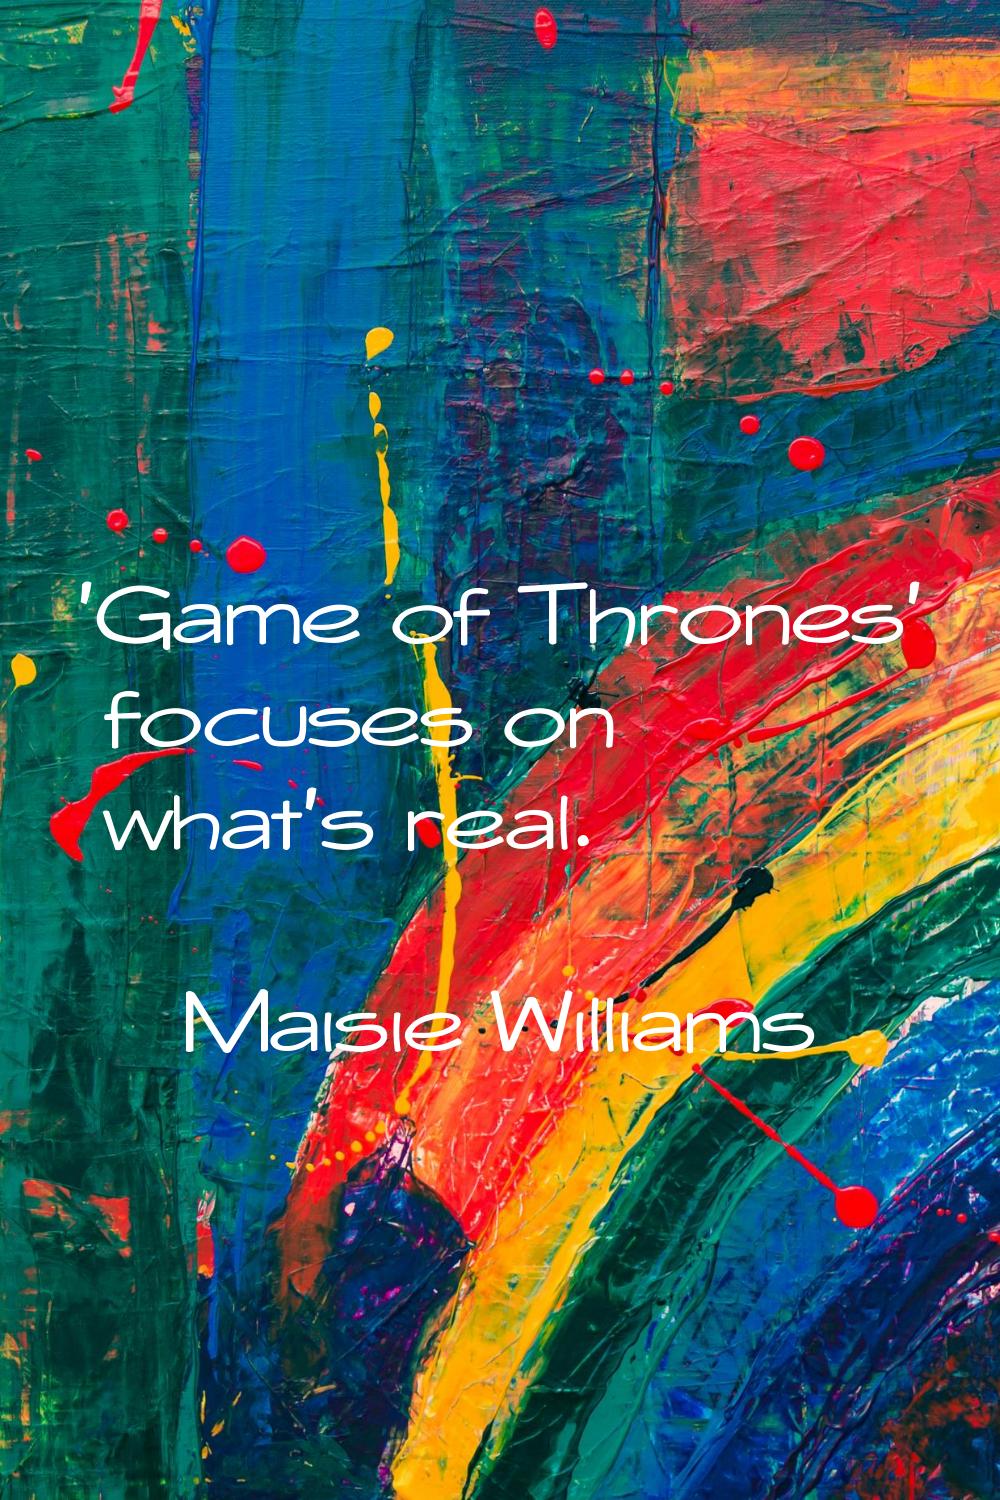 'Game of Thrones' focuses on what's real.